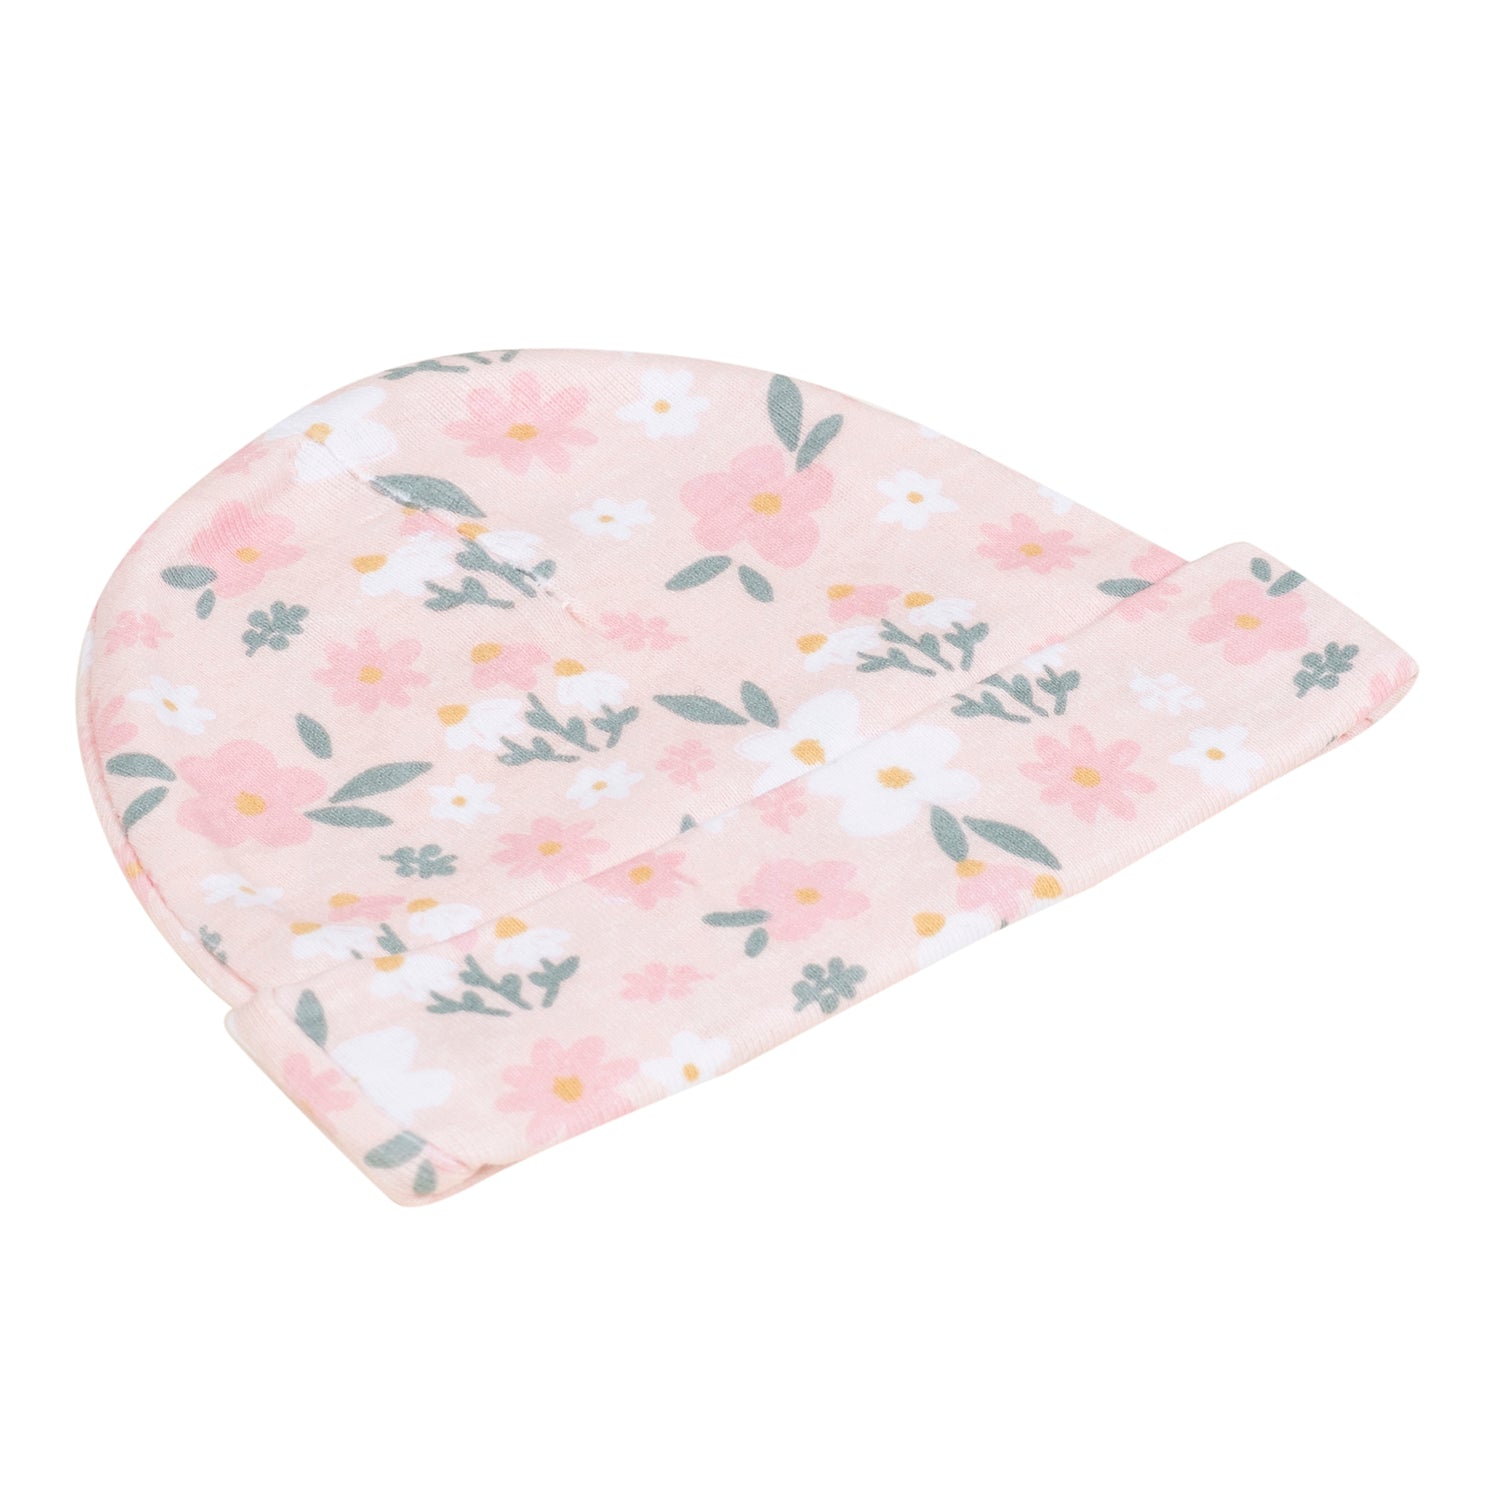 Baby Moo Floral Print Infants Ultra Soft 100% Cotton All Season Pack of 5 Caps - Pink